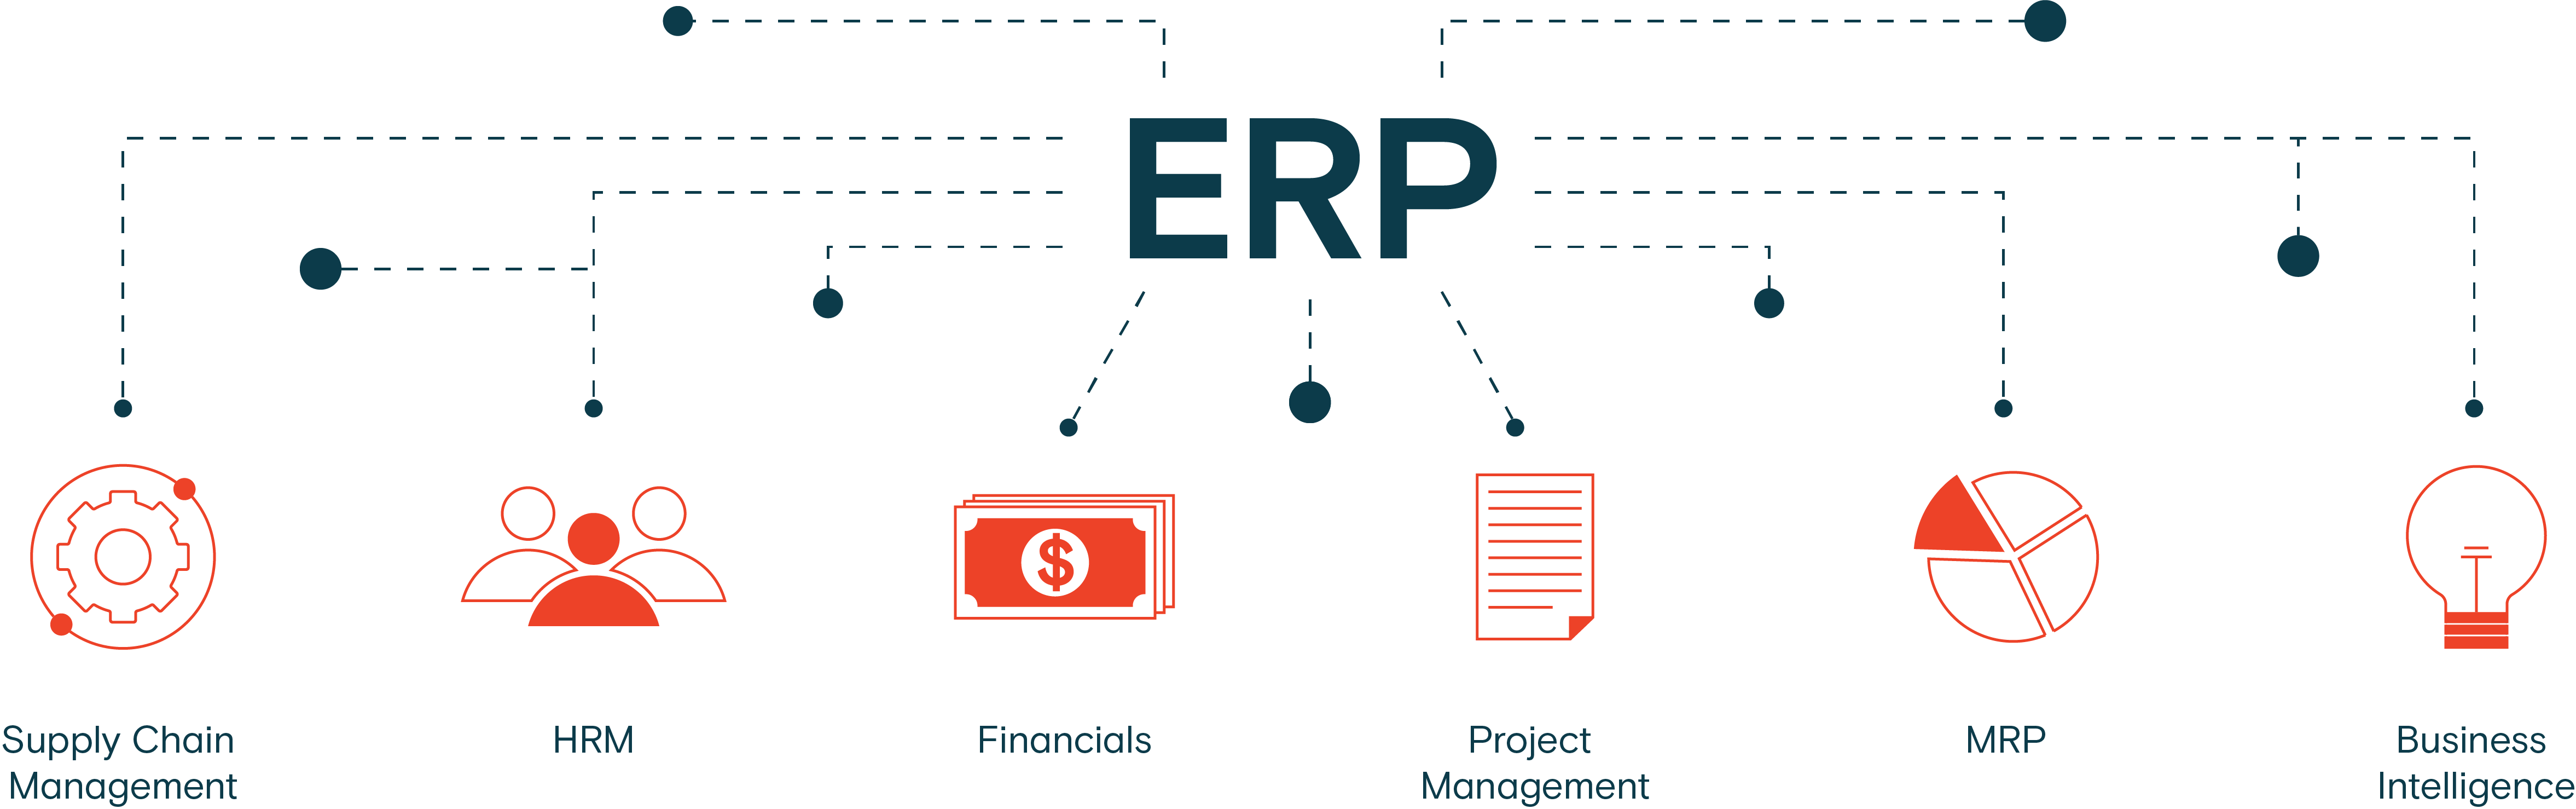 ERP acronym connected to the various industries that are apart of it: supply chain management, HRM, financials, etc